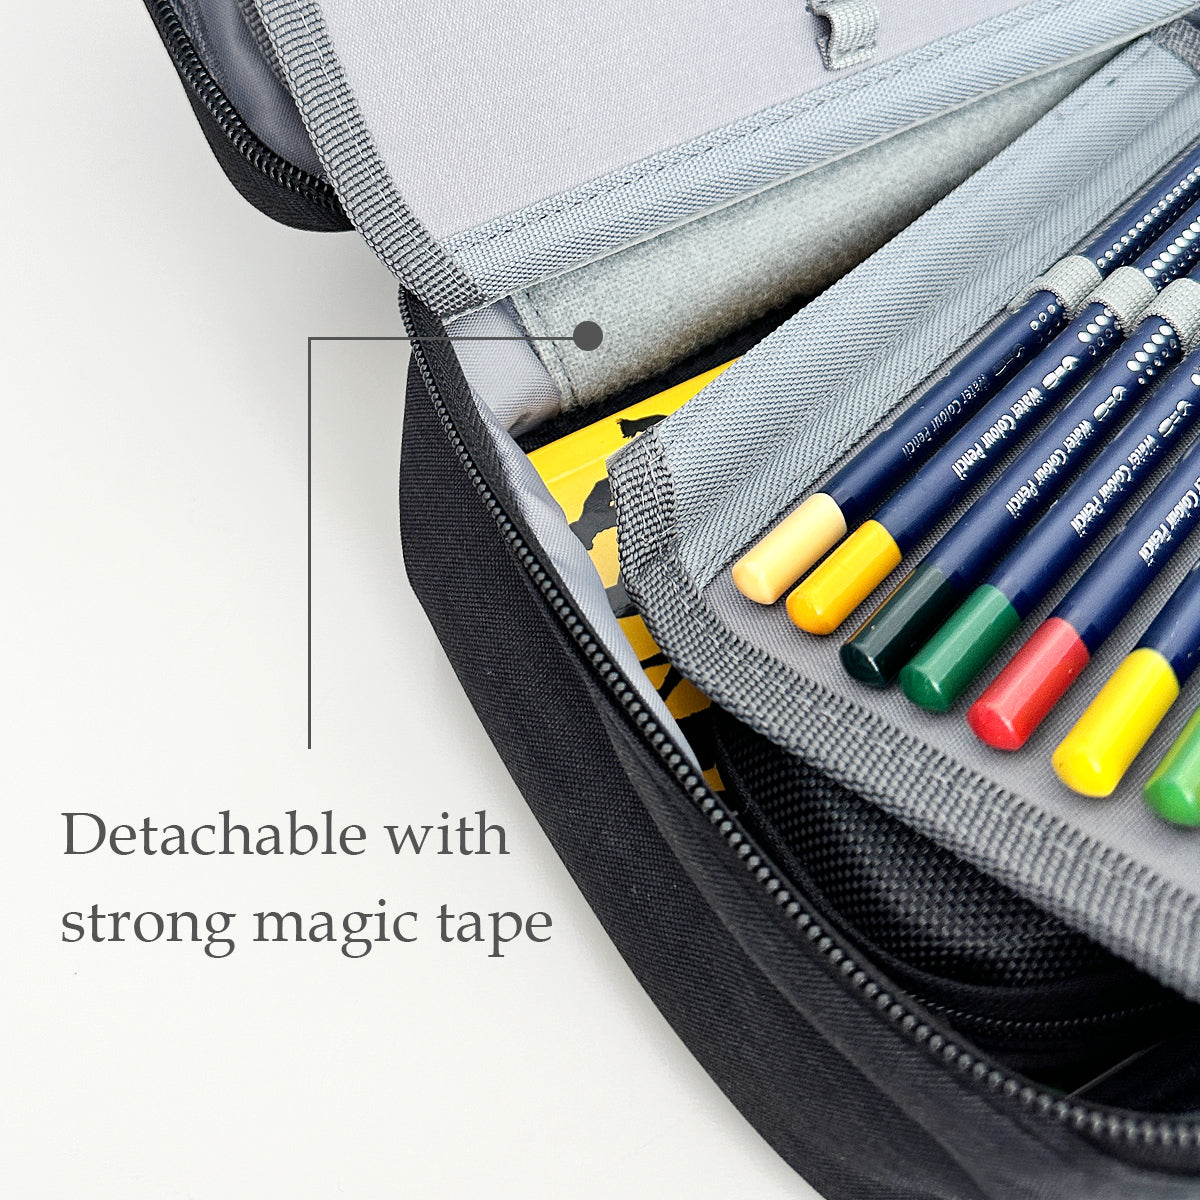 Wrapables Large Capacity Pencil Case, Expandable Pencil Pouch for Stationery Tools Navy